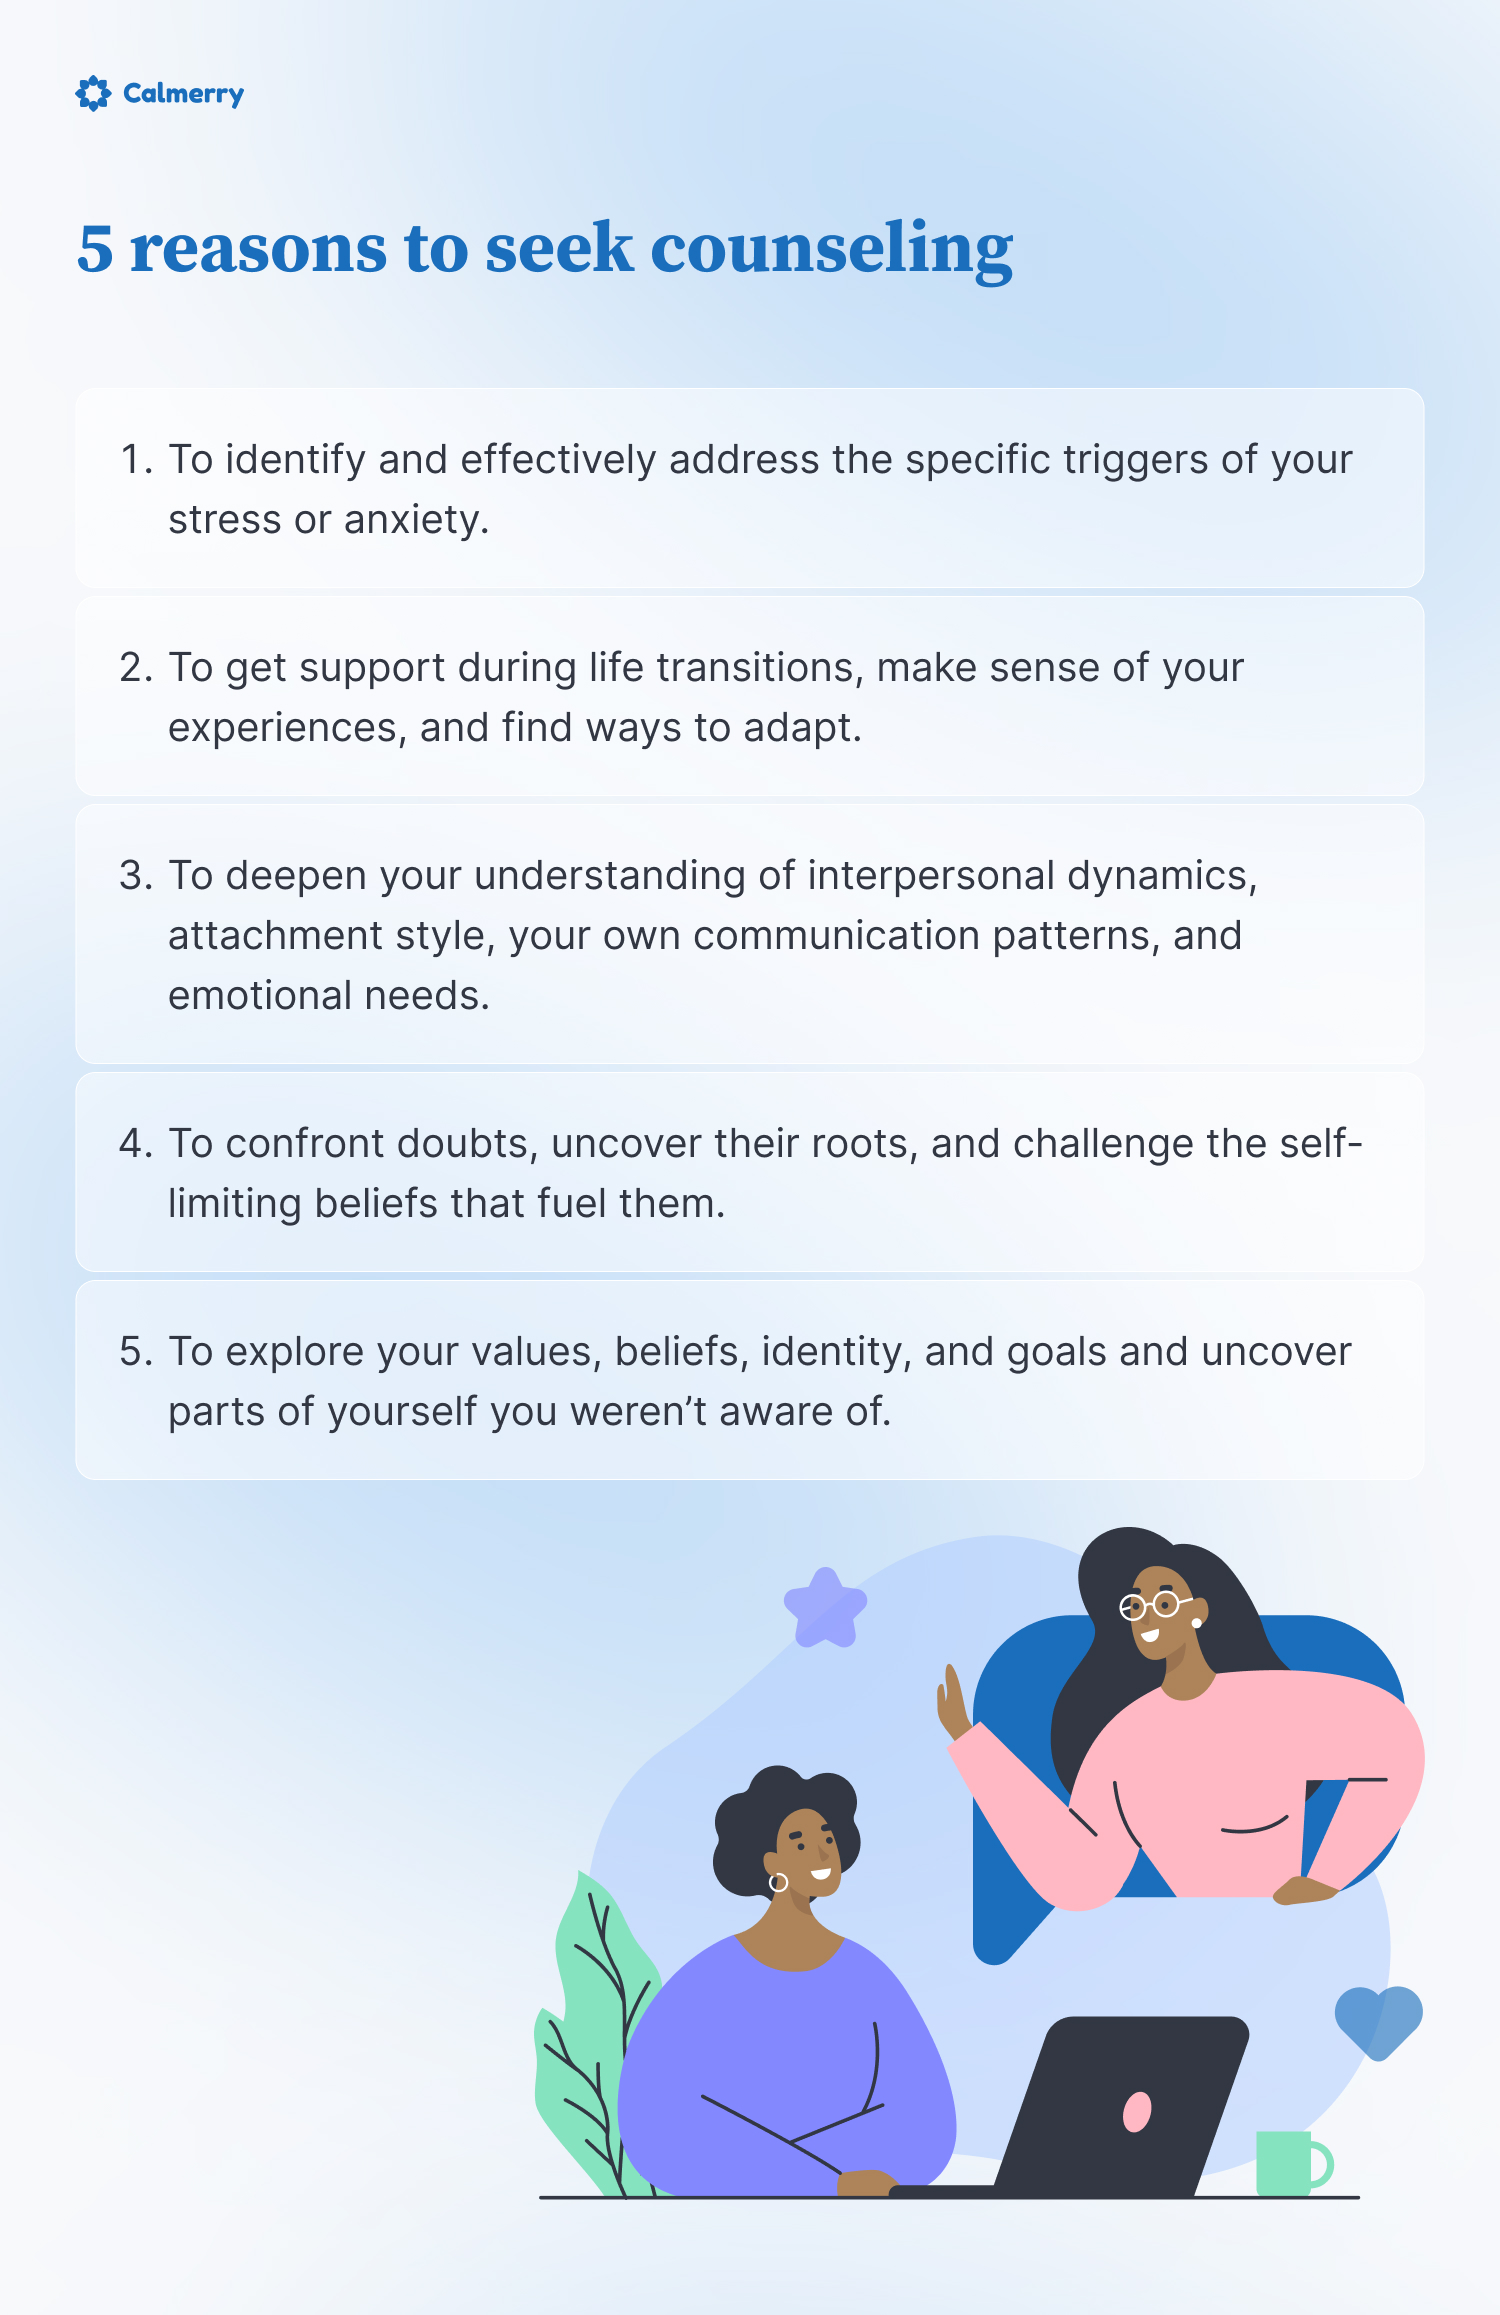 5 reasons to seek counseling
To identify and effectively address the specific triggers of your stress or anxiety.
To get support during life transitions, make sense of your experiences, and find ways to adapt. 
To deepen your understanding of interpersonal dynamics, attachment style, your own communication patterns, and emotional needs. 
To confront doubts, uncover their roots, and challenge the self-limiting beliefs that fuel them. 
To explore your values, beliefs, identity, and goals and uncover parts of yourself you weren’t aware of.
